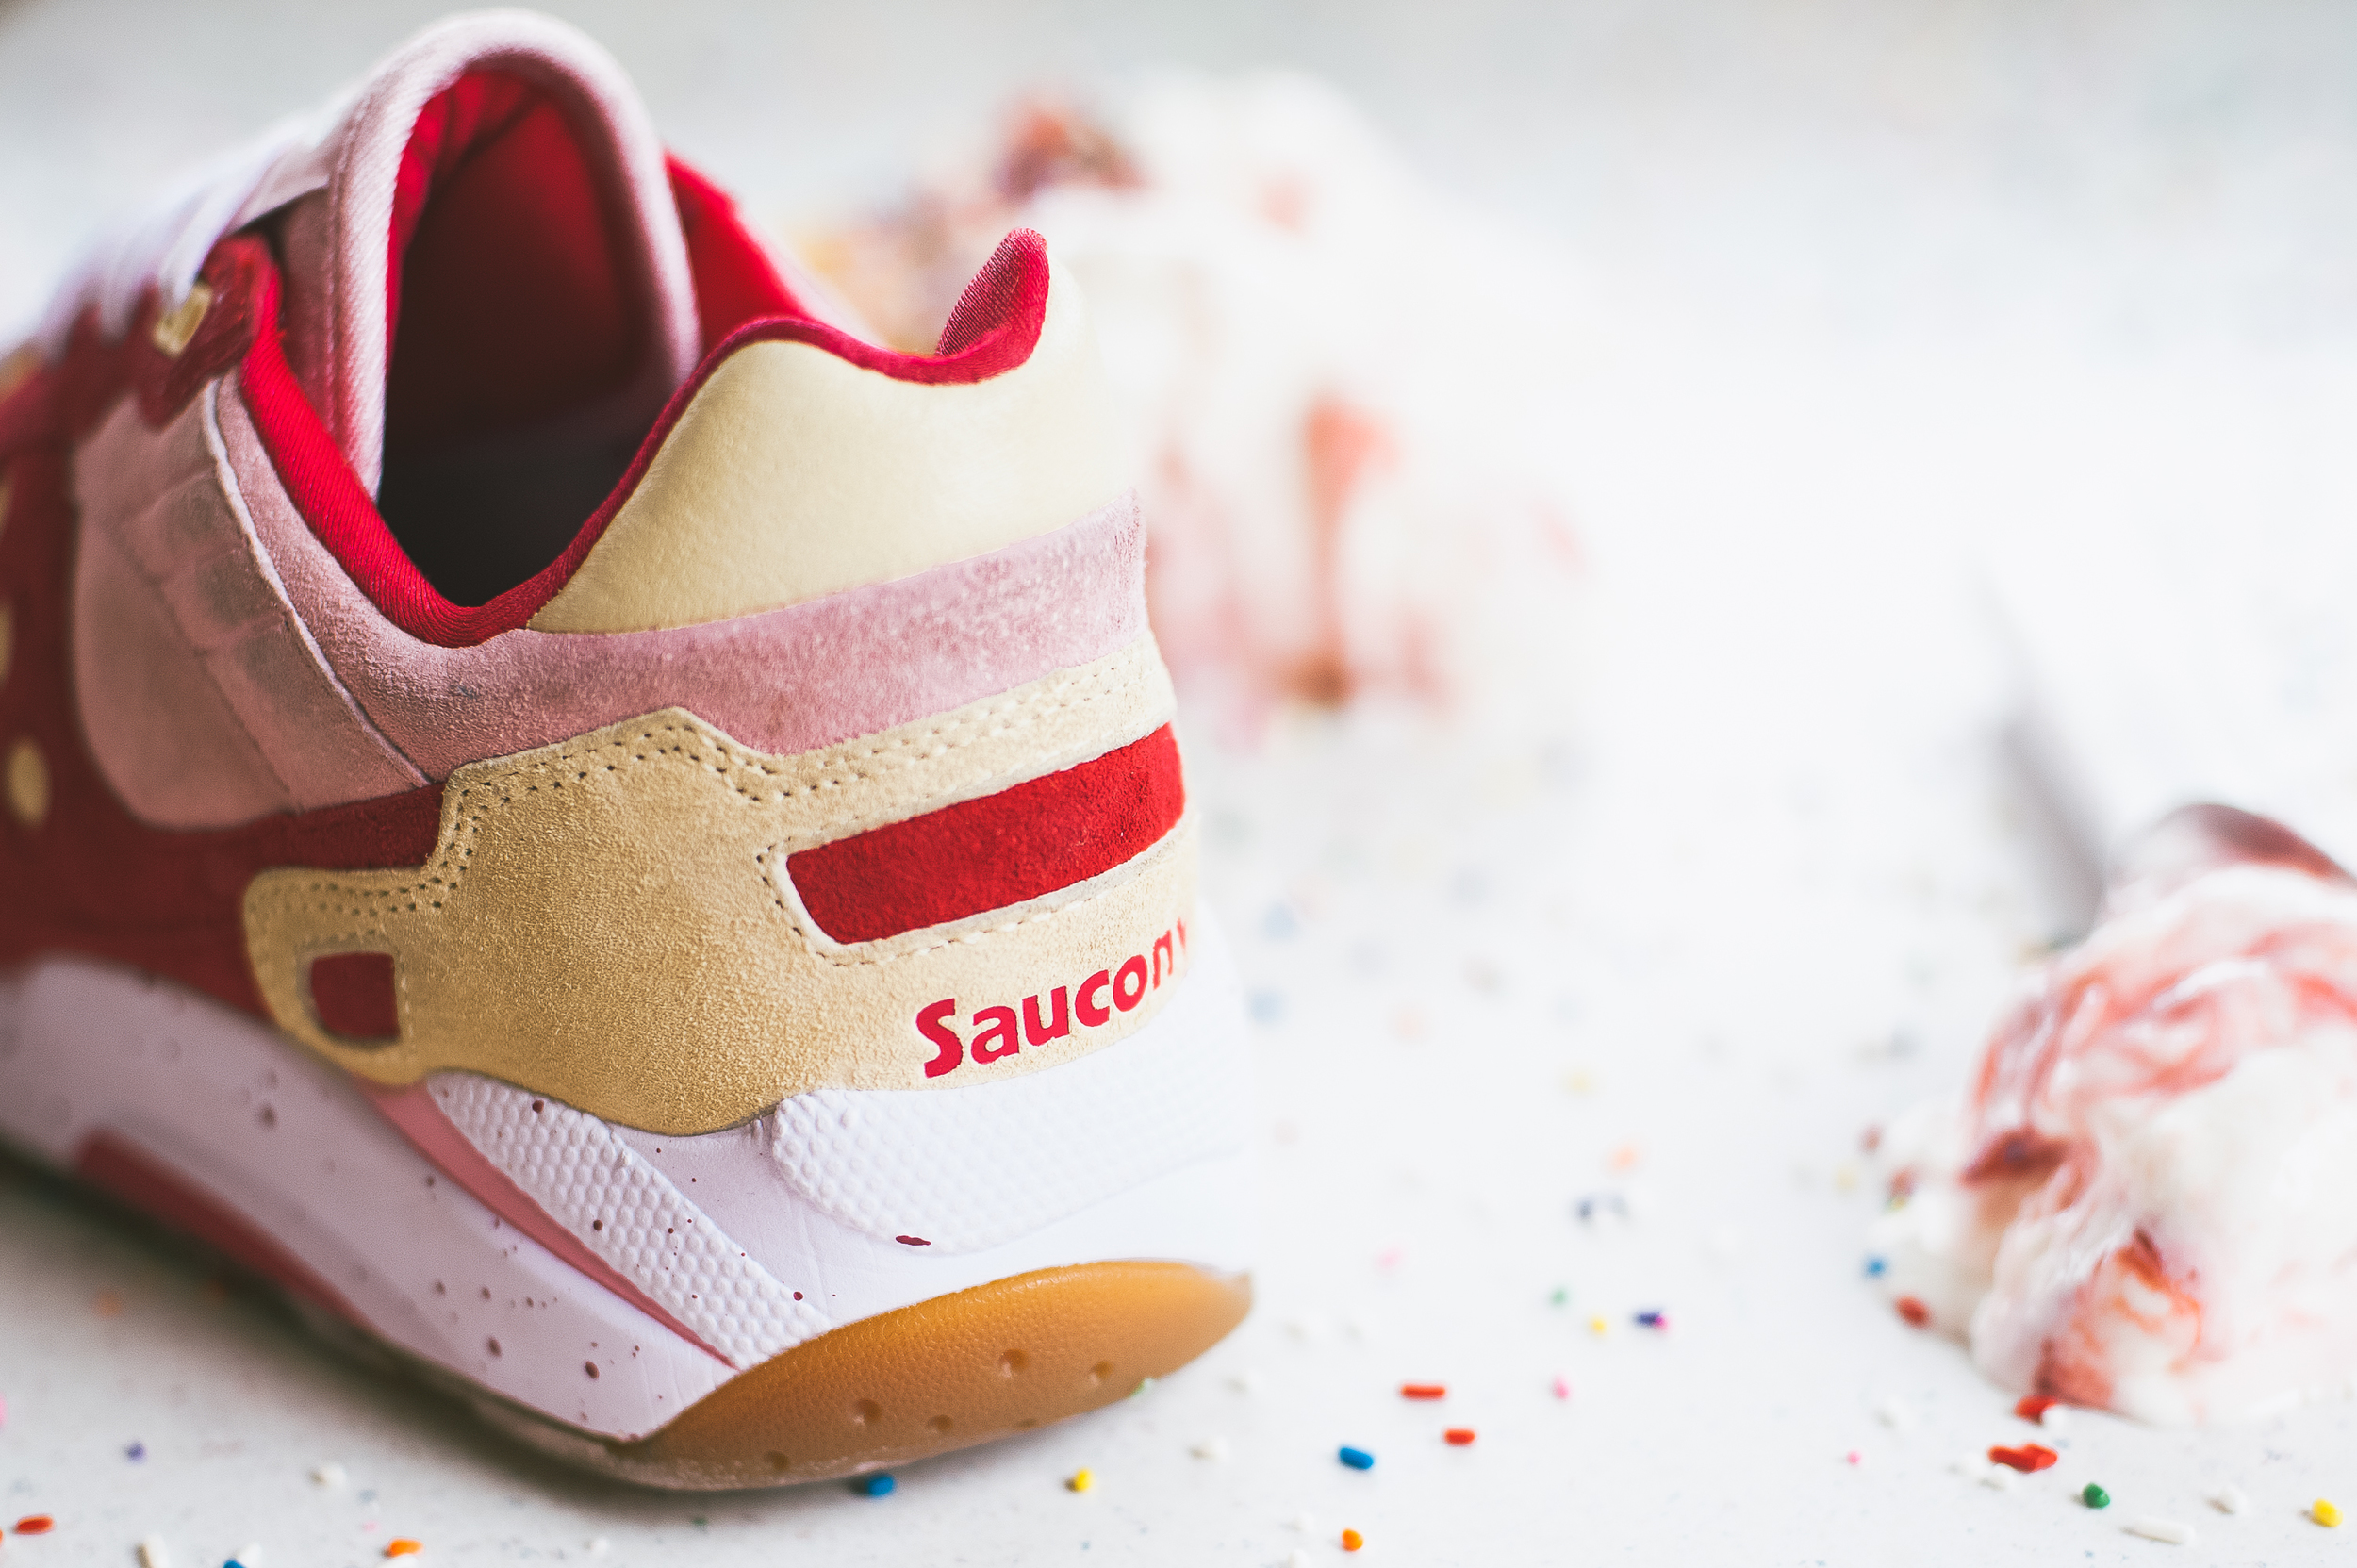 Saucony Originals Scoops Pack Dustin Guidry Photography 38.jpg